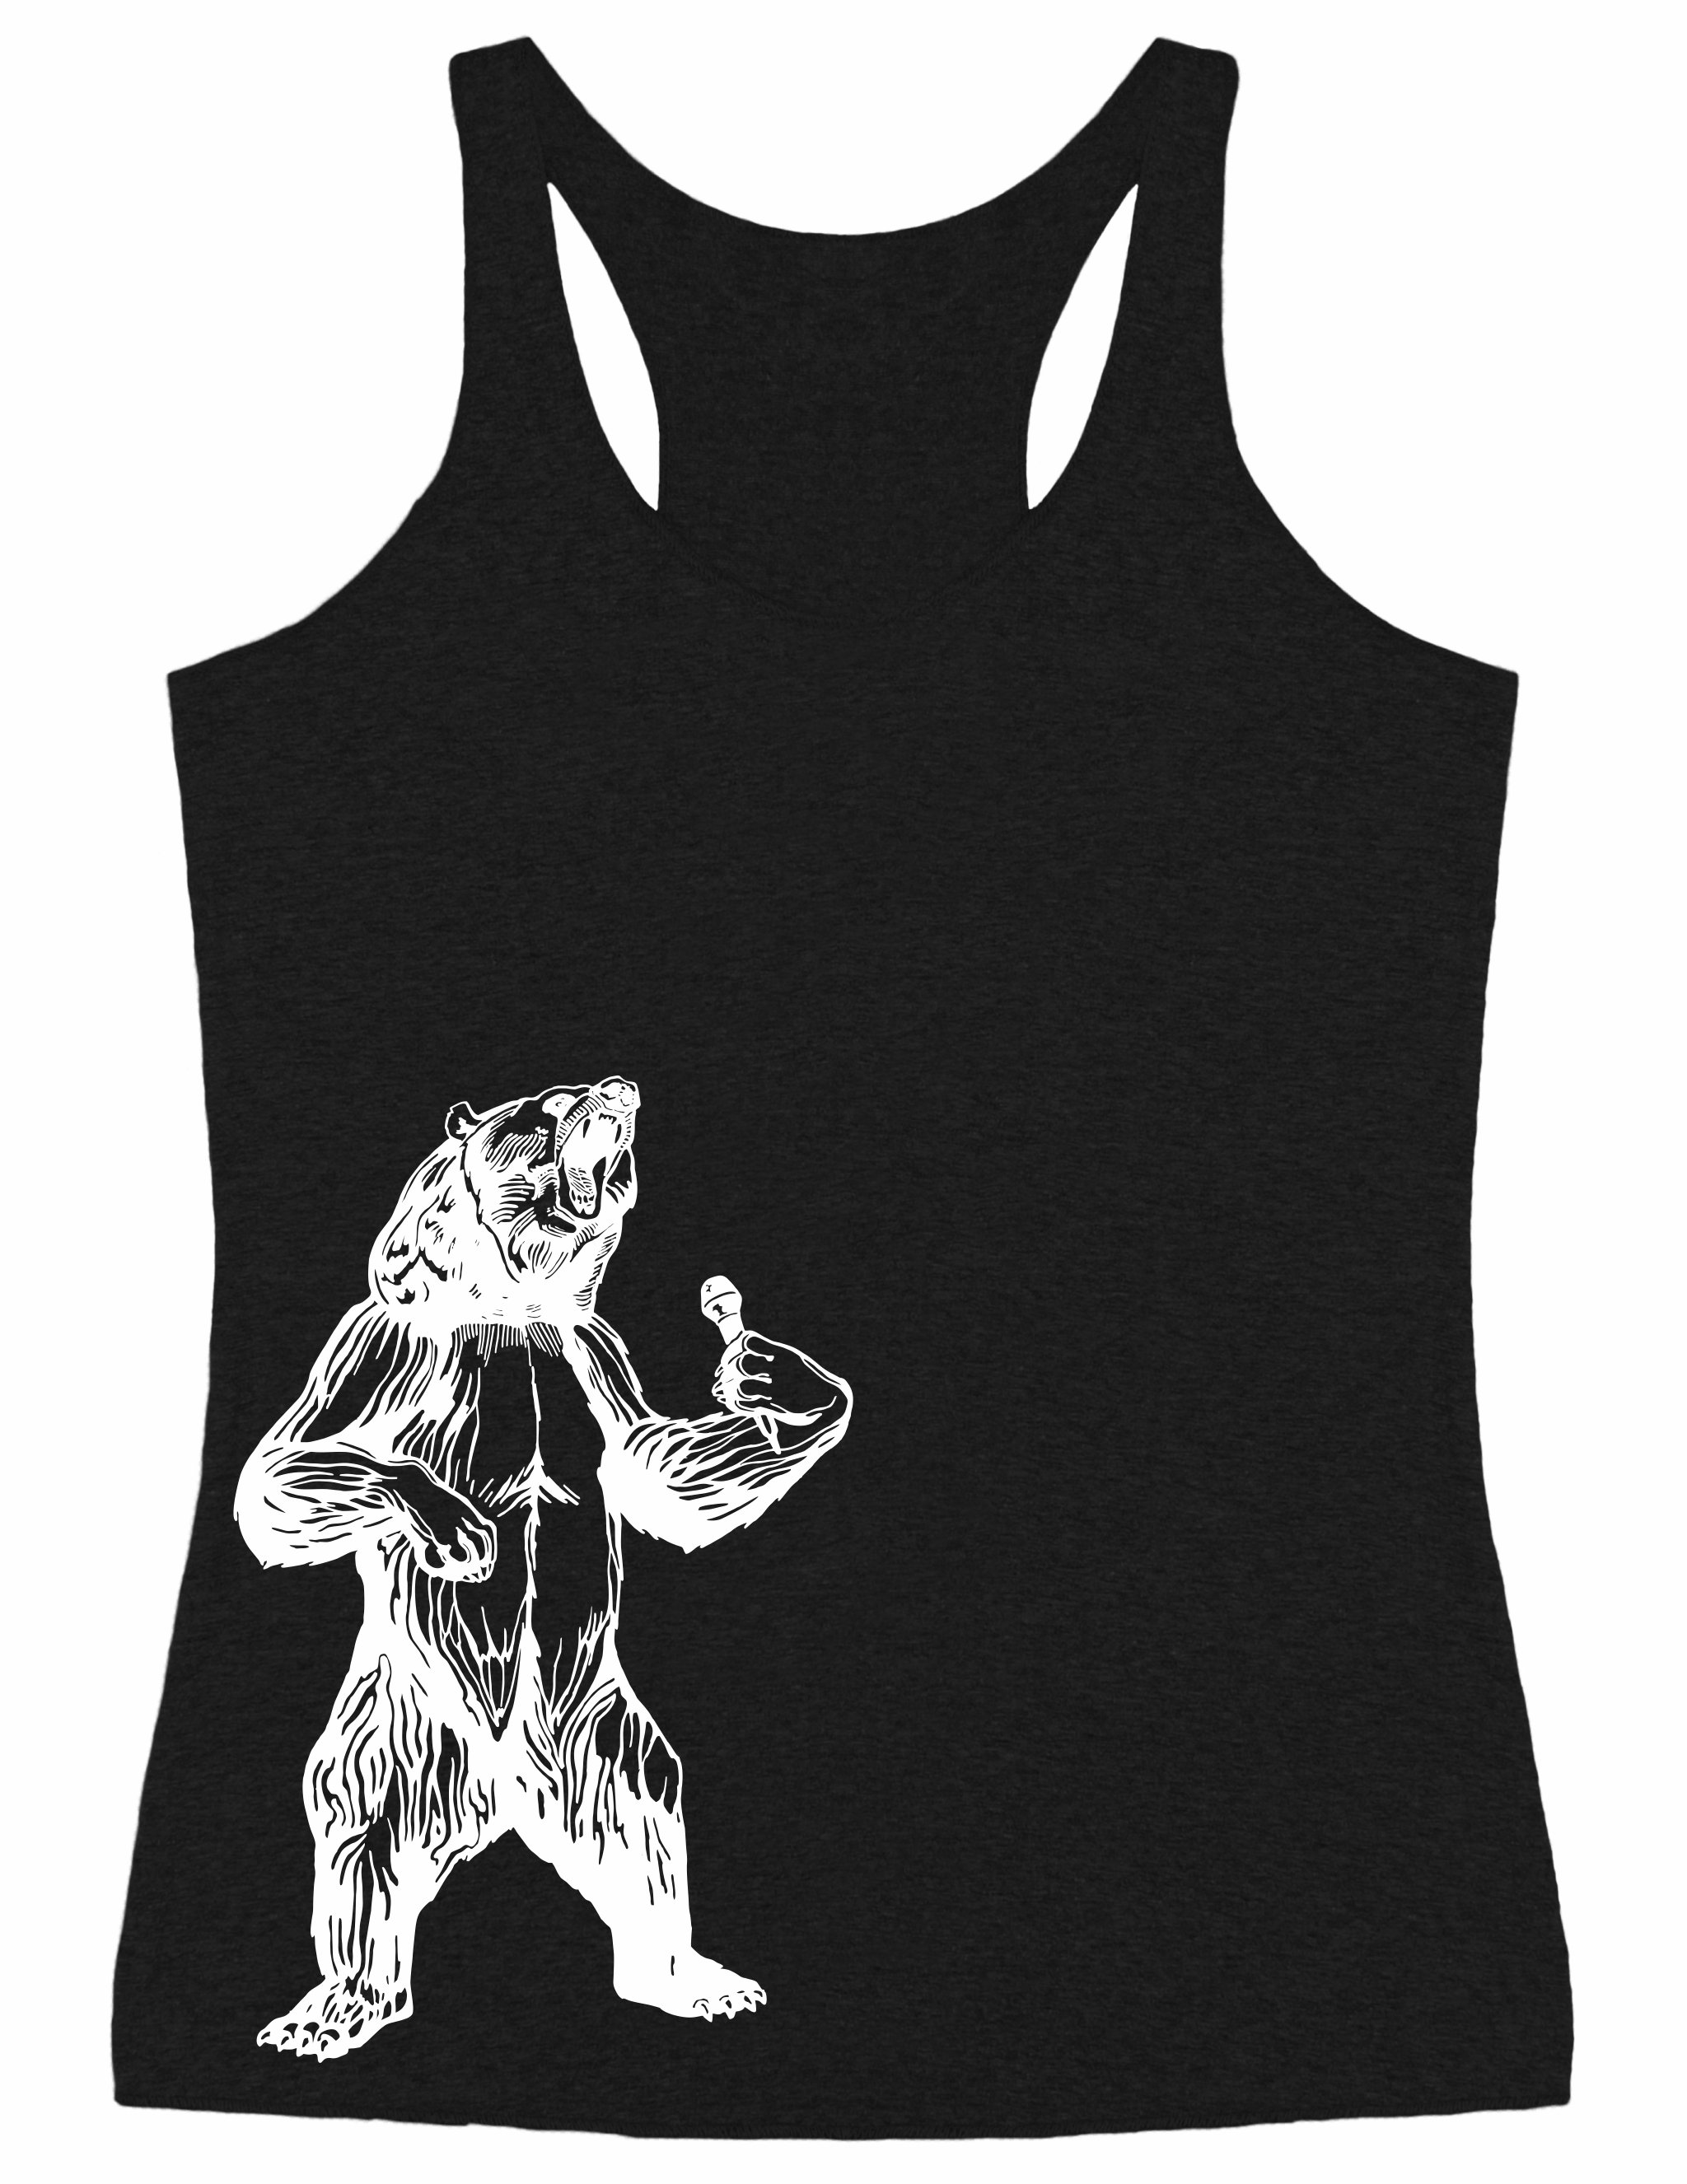 Bear Trying To Sing Women's Tri-Blend Tank Top Gift For Her, Wife Birthday, Musicina Girlfriend Gift, Music Gifts Mom Seembo